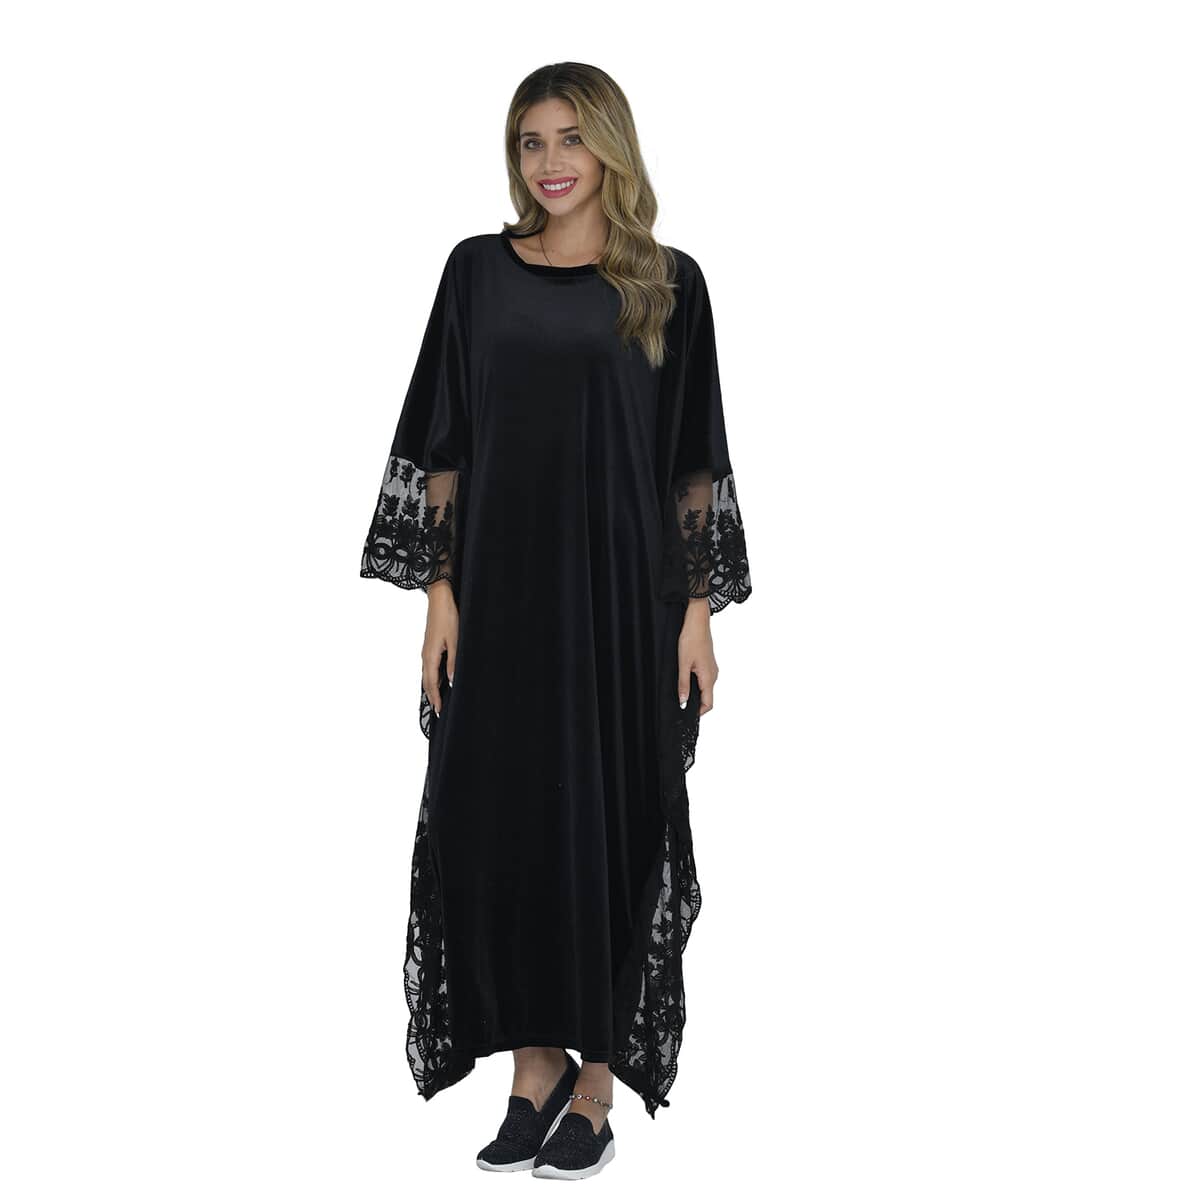 Tamsy Black Label - Lux Stretch Velvet Kaftan with Lace in Black - One Size Fits Most image number 0